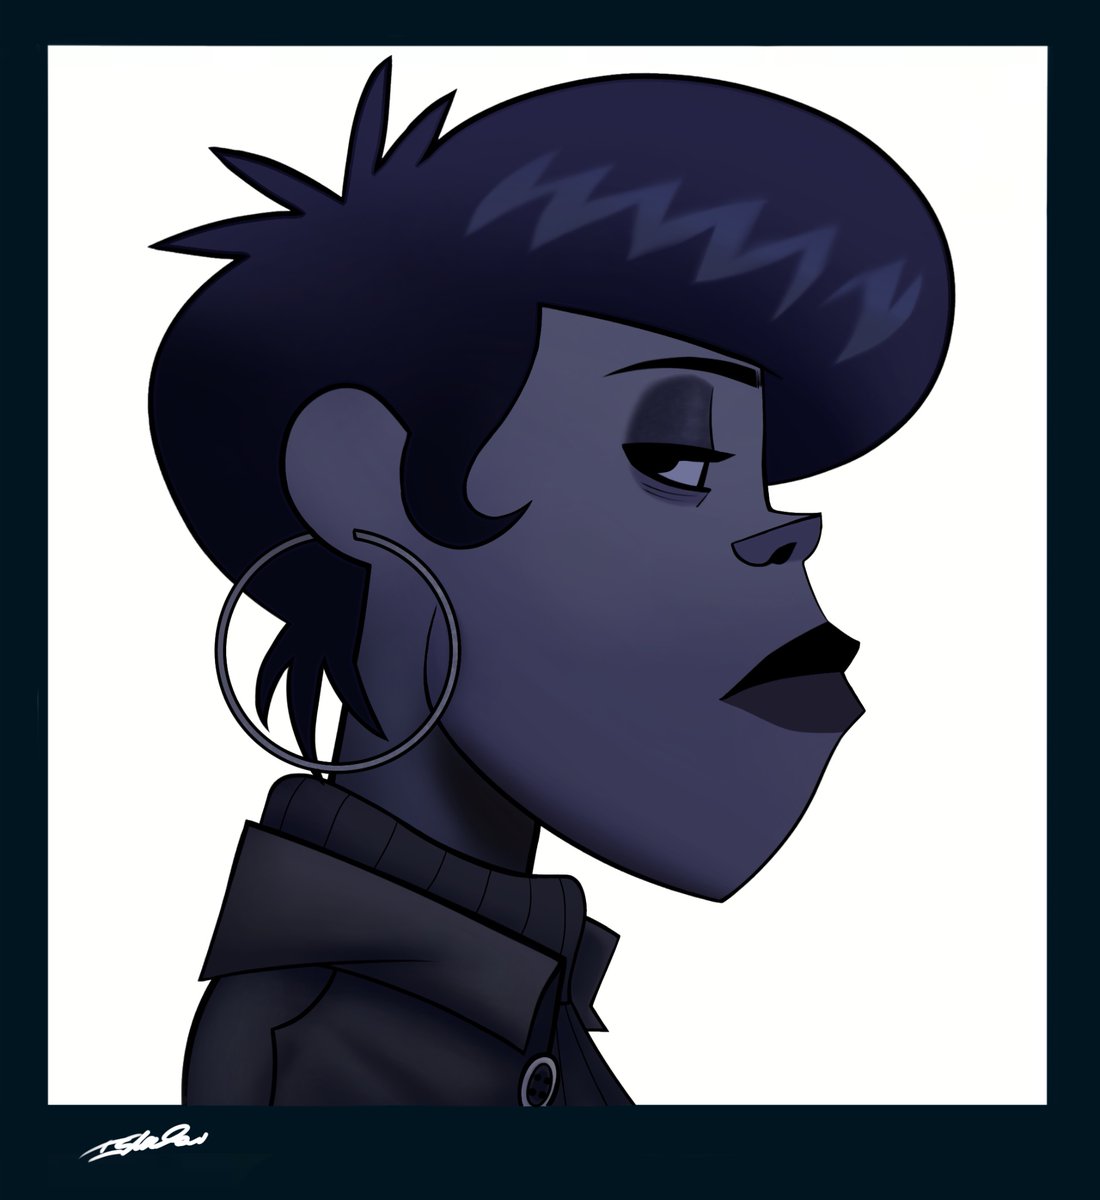 I had to scroll all the way back to November but I REDREW HER DD SIDE PROFILE-

#Gorillazoc #Gtwt #digitalart